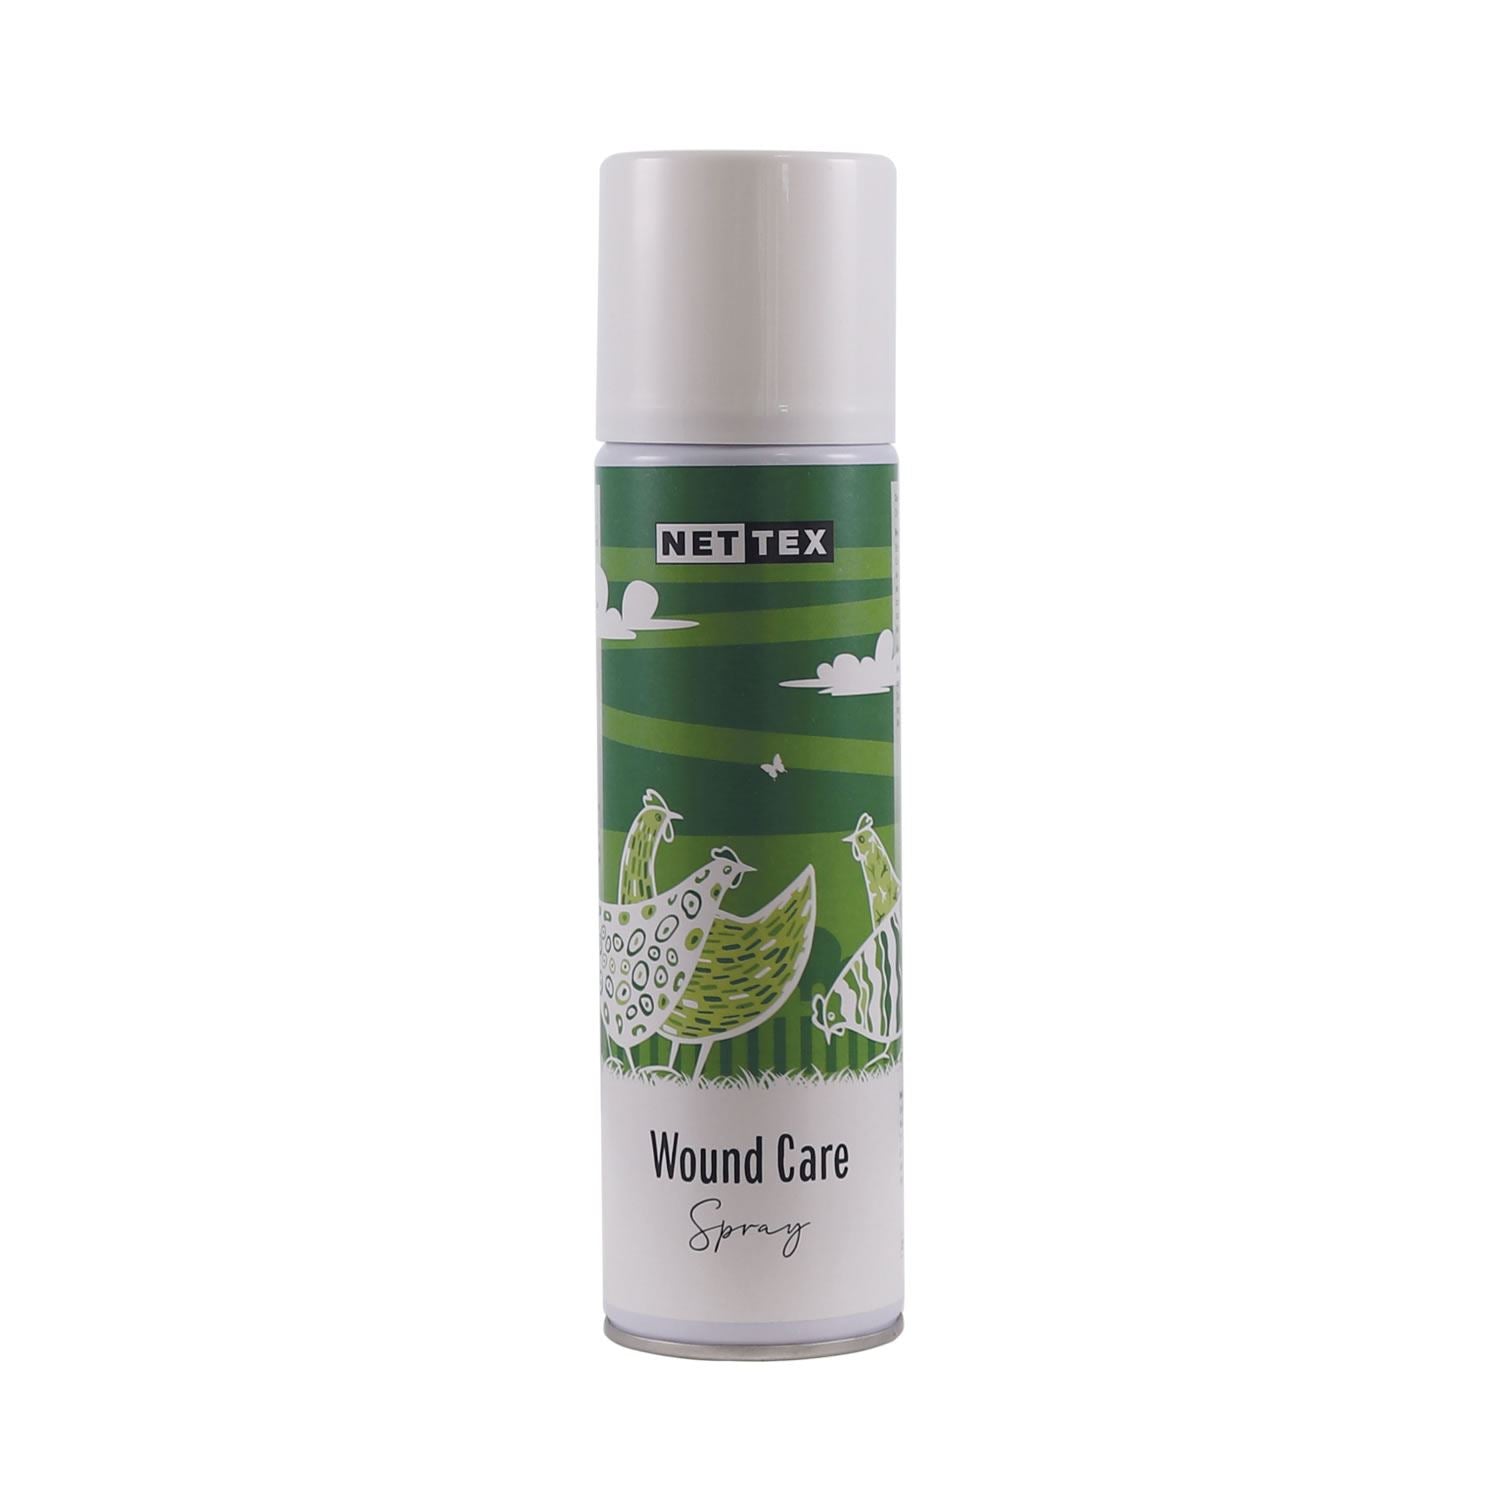 Nettex Wound Care Spray - Just Horse Riders